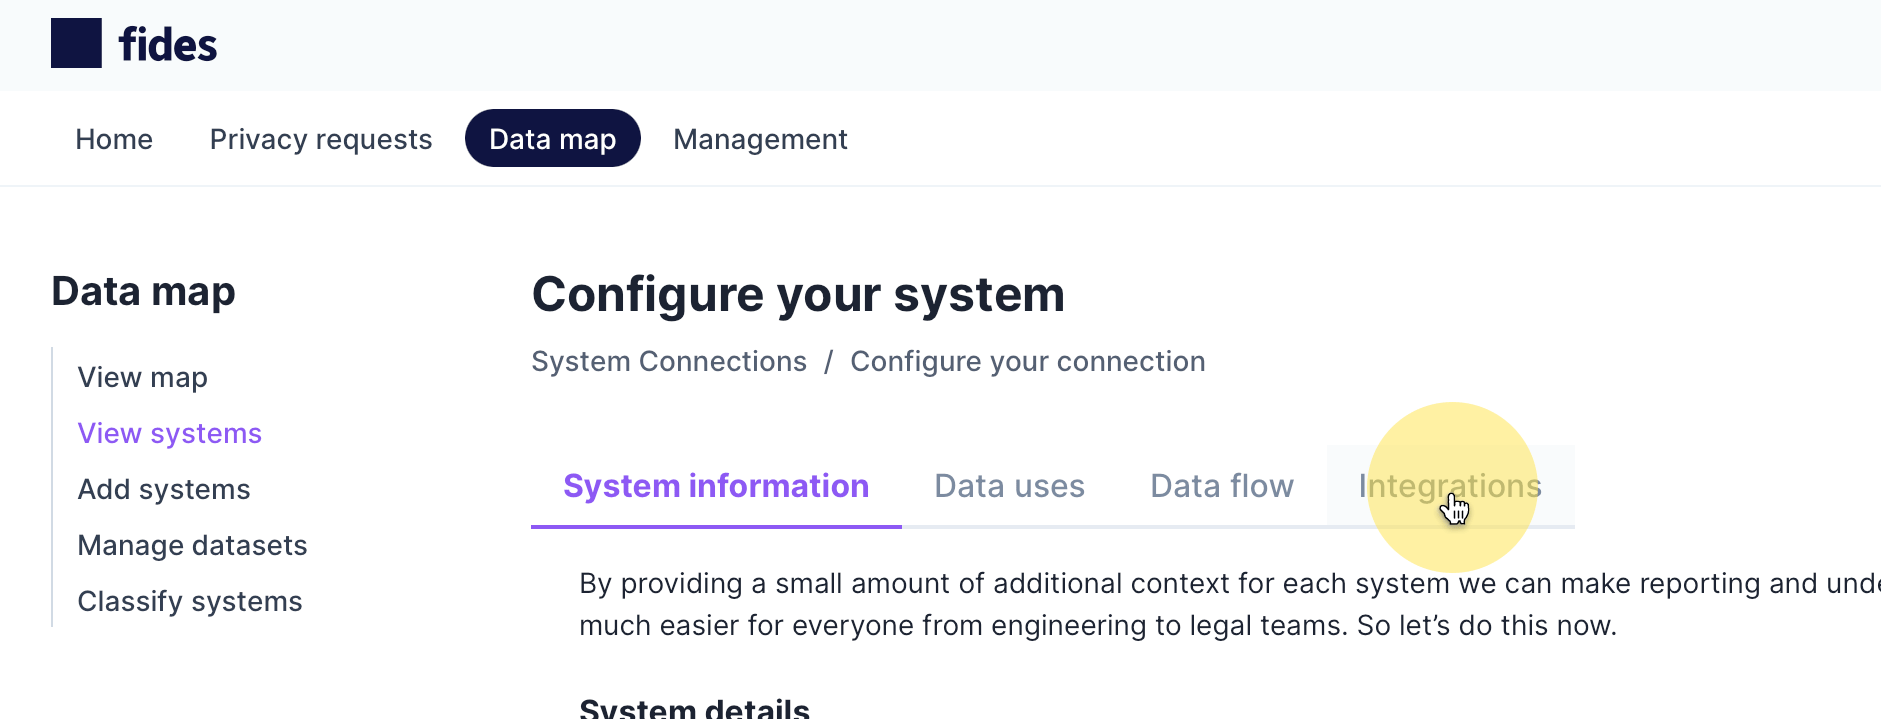 View integrations